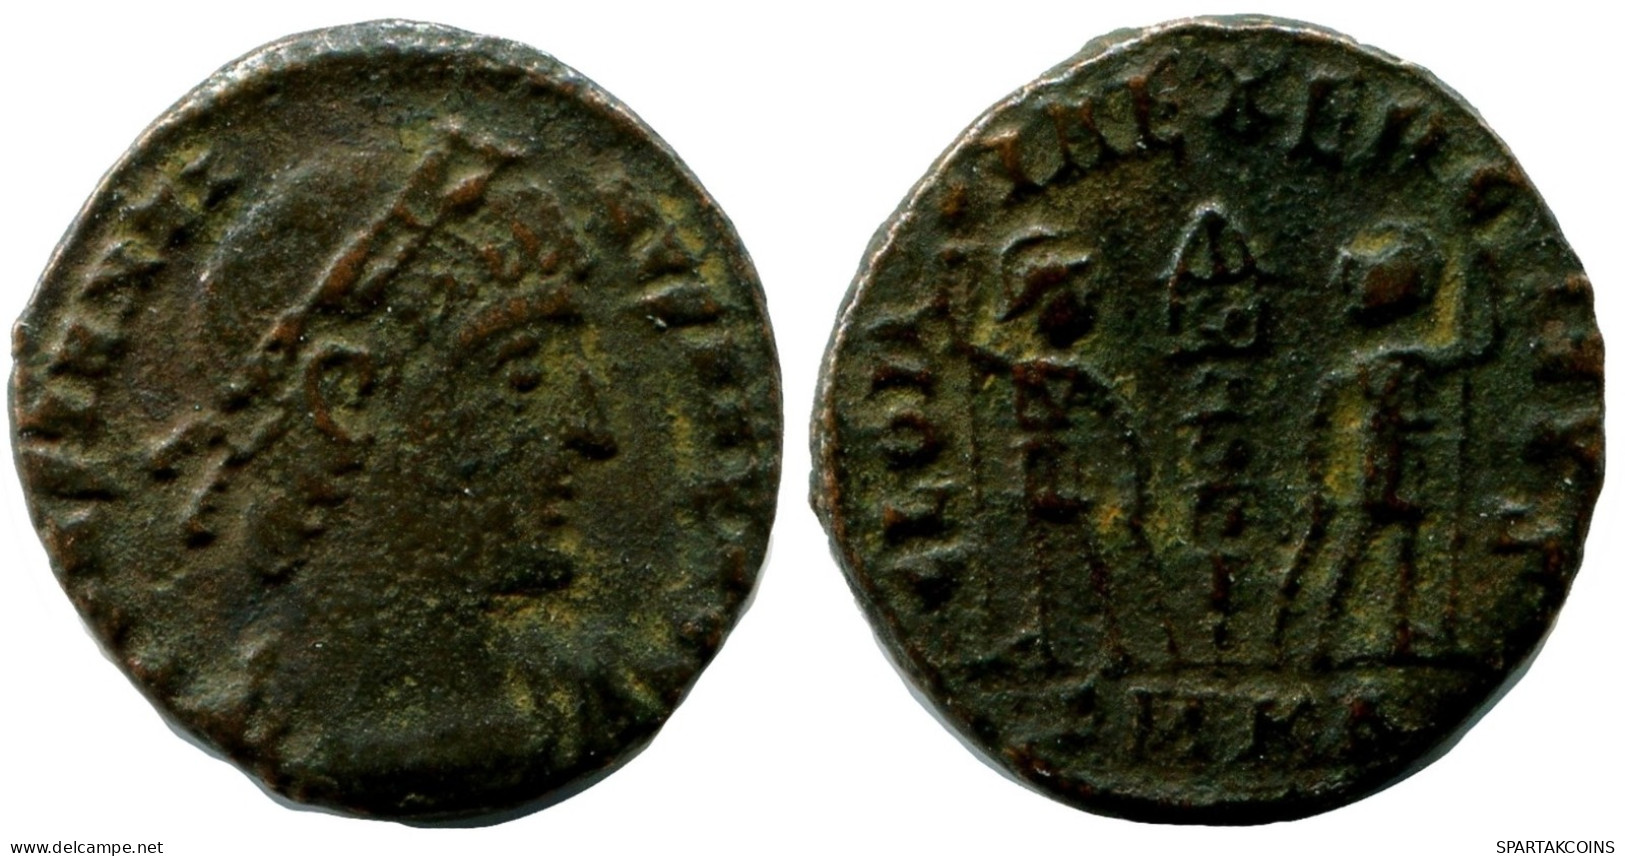 CONSTANTINE I MINTED IN CYZICUS FROM THE ROYAL ONTARIO MUSEUM #ANC11038.14.D.A - The Christian Empire (307 AD To 363 AD)